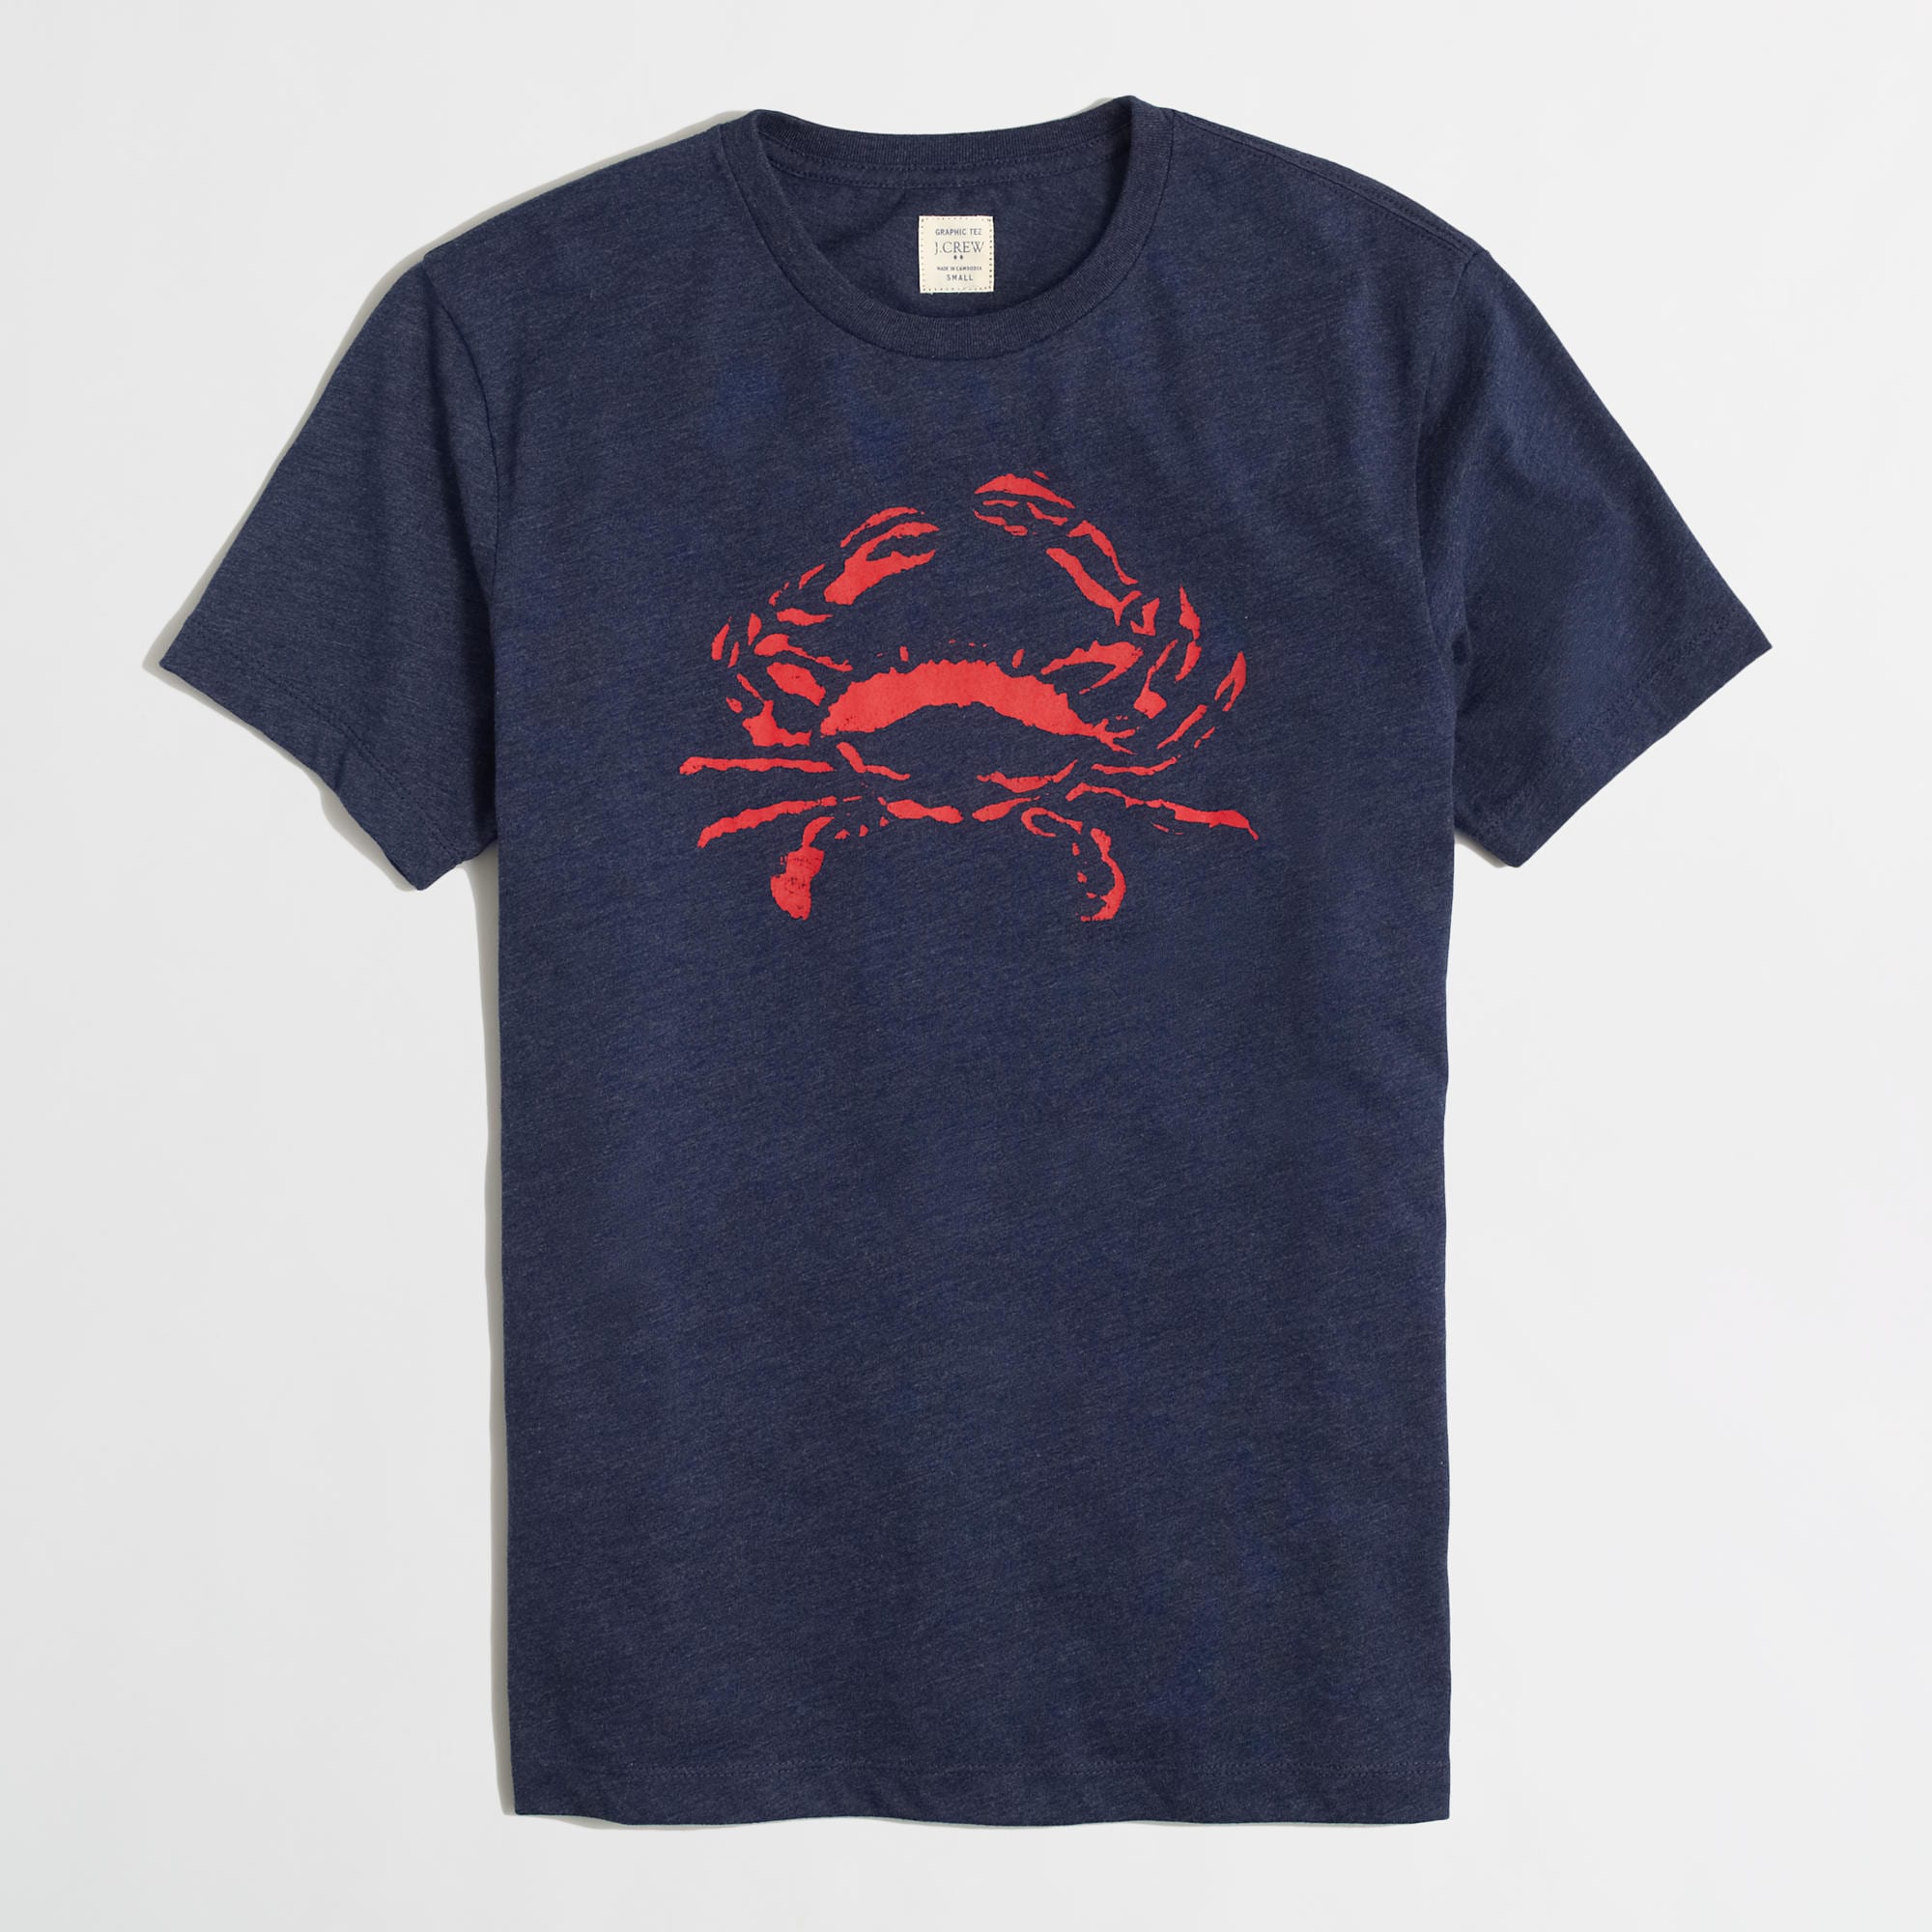 Graphic Tee 2016: Crab T Shirt by J Crew